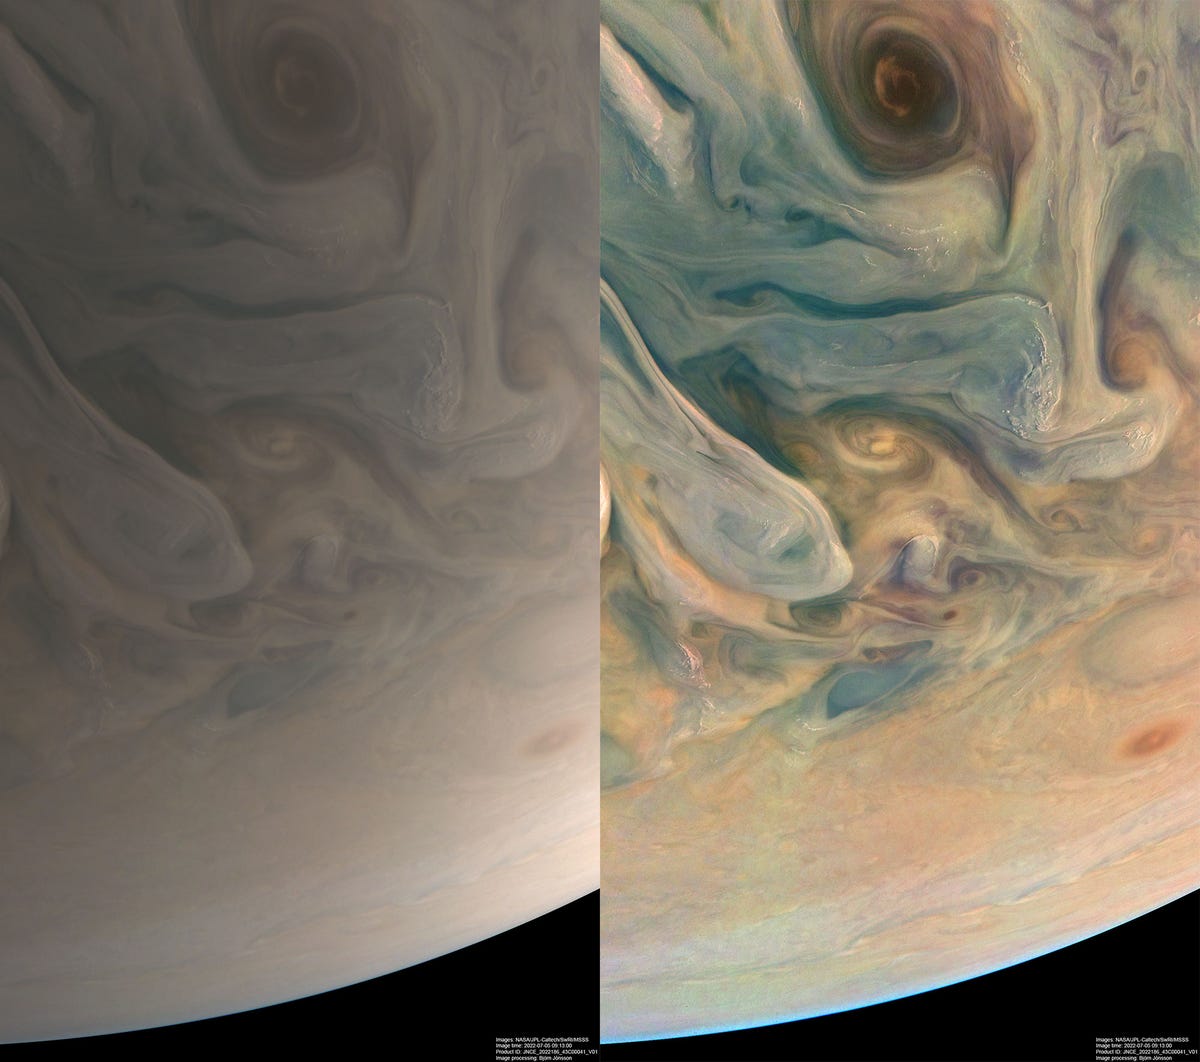 On the left is a dim, beige version of Jupiter.  On the right is the same image, except with blue, orange, and yellow tones.